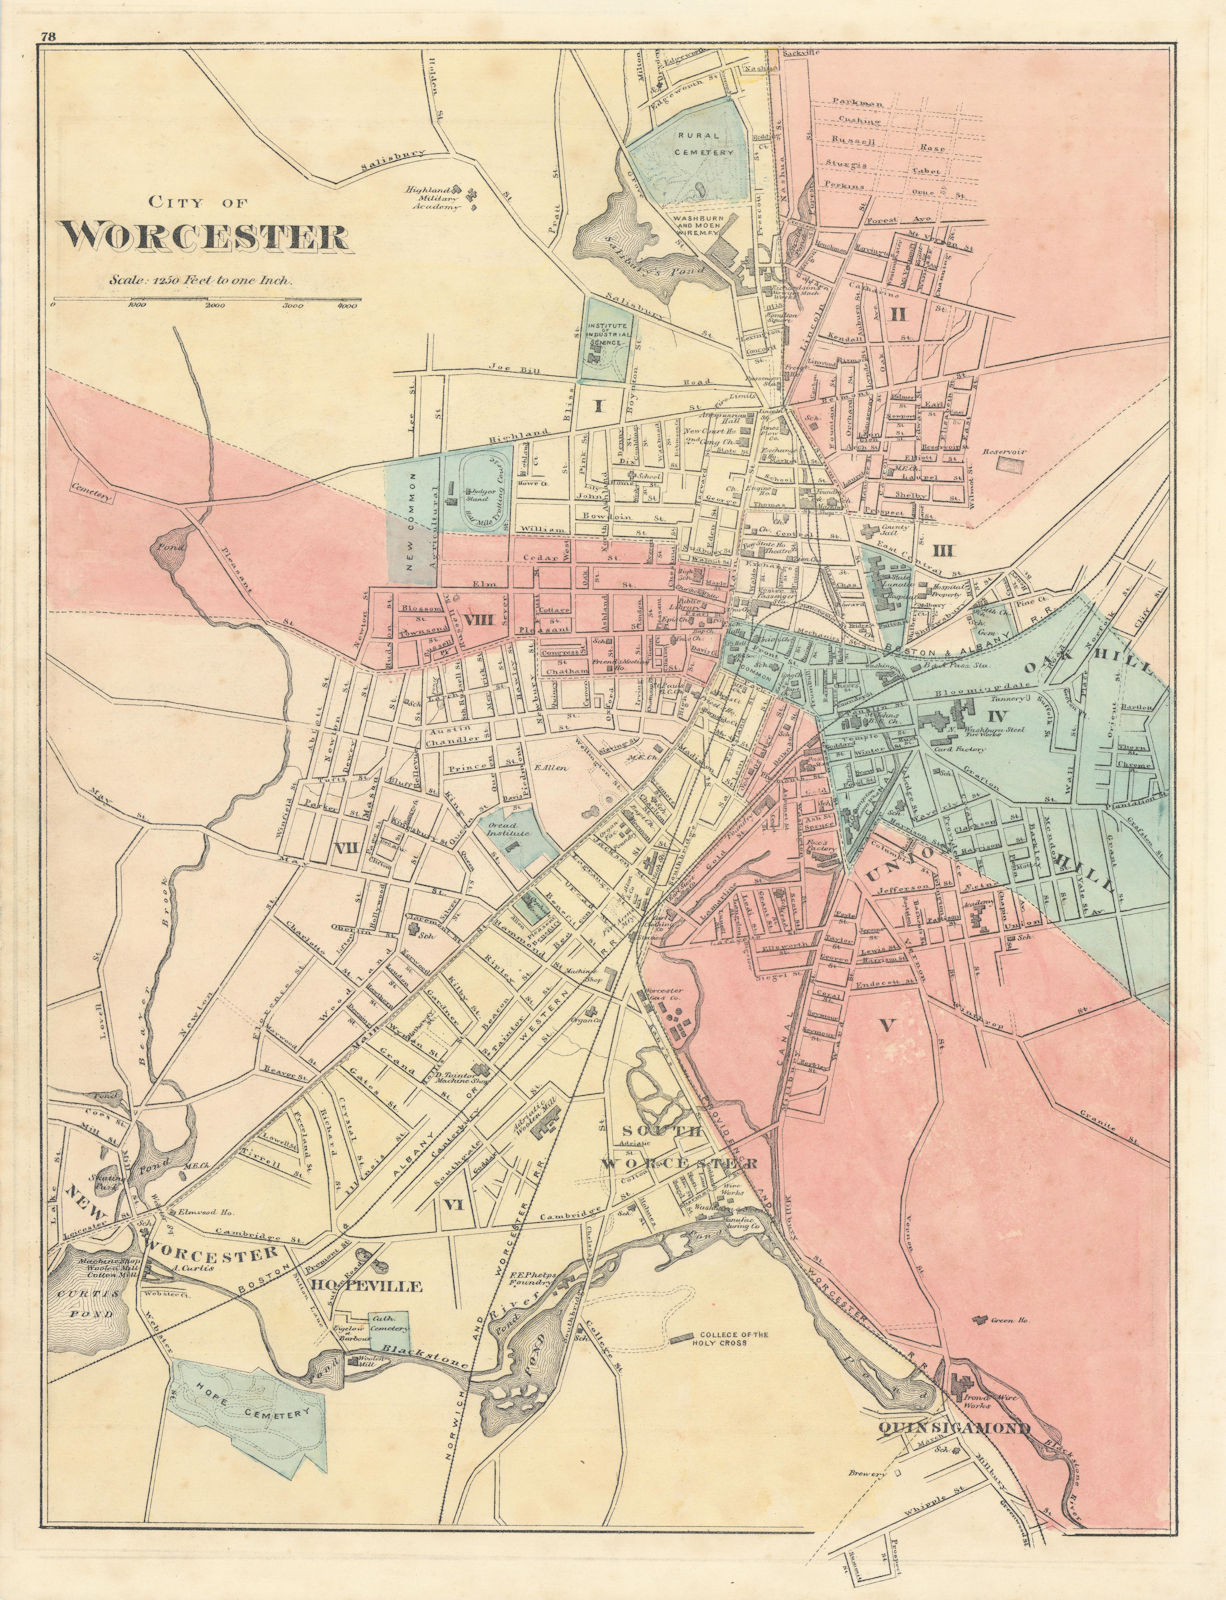 Associate Product City of Worcester, Massachusetts. Town plan. WALLING & GRAY 1871 old map